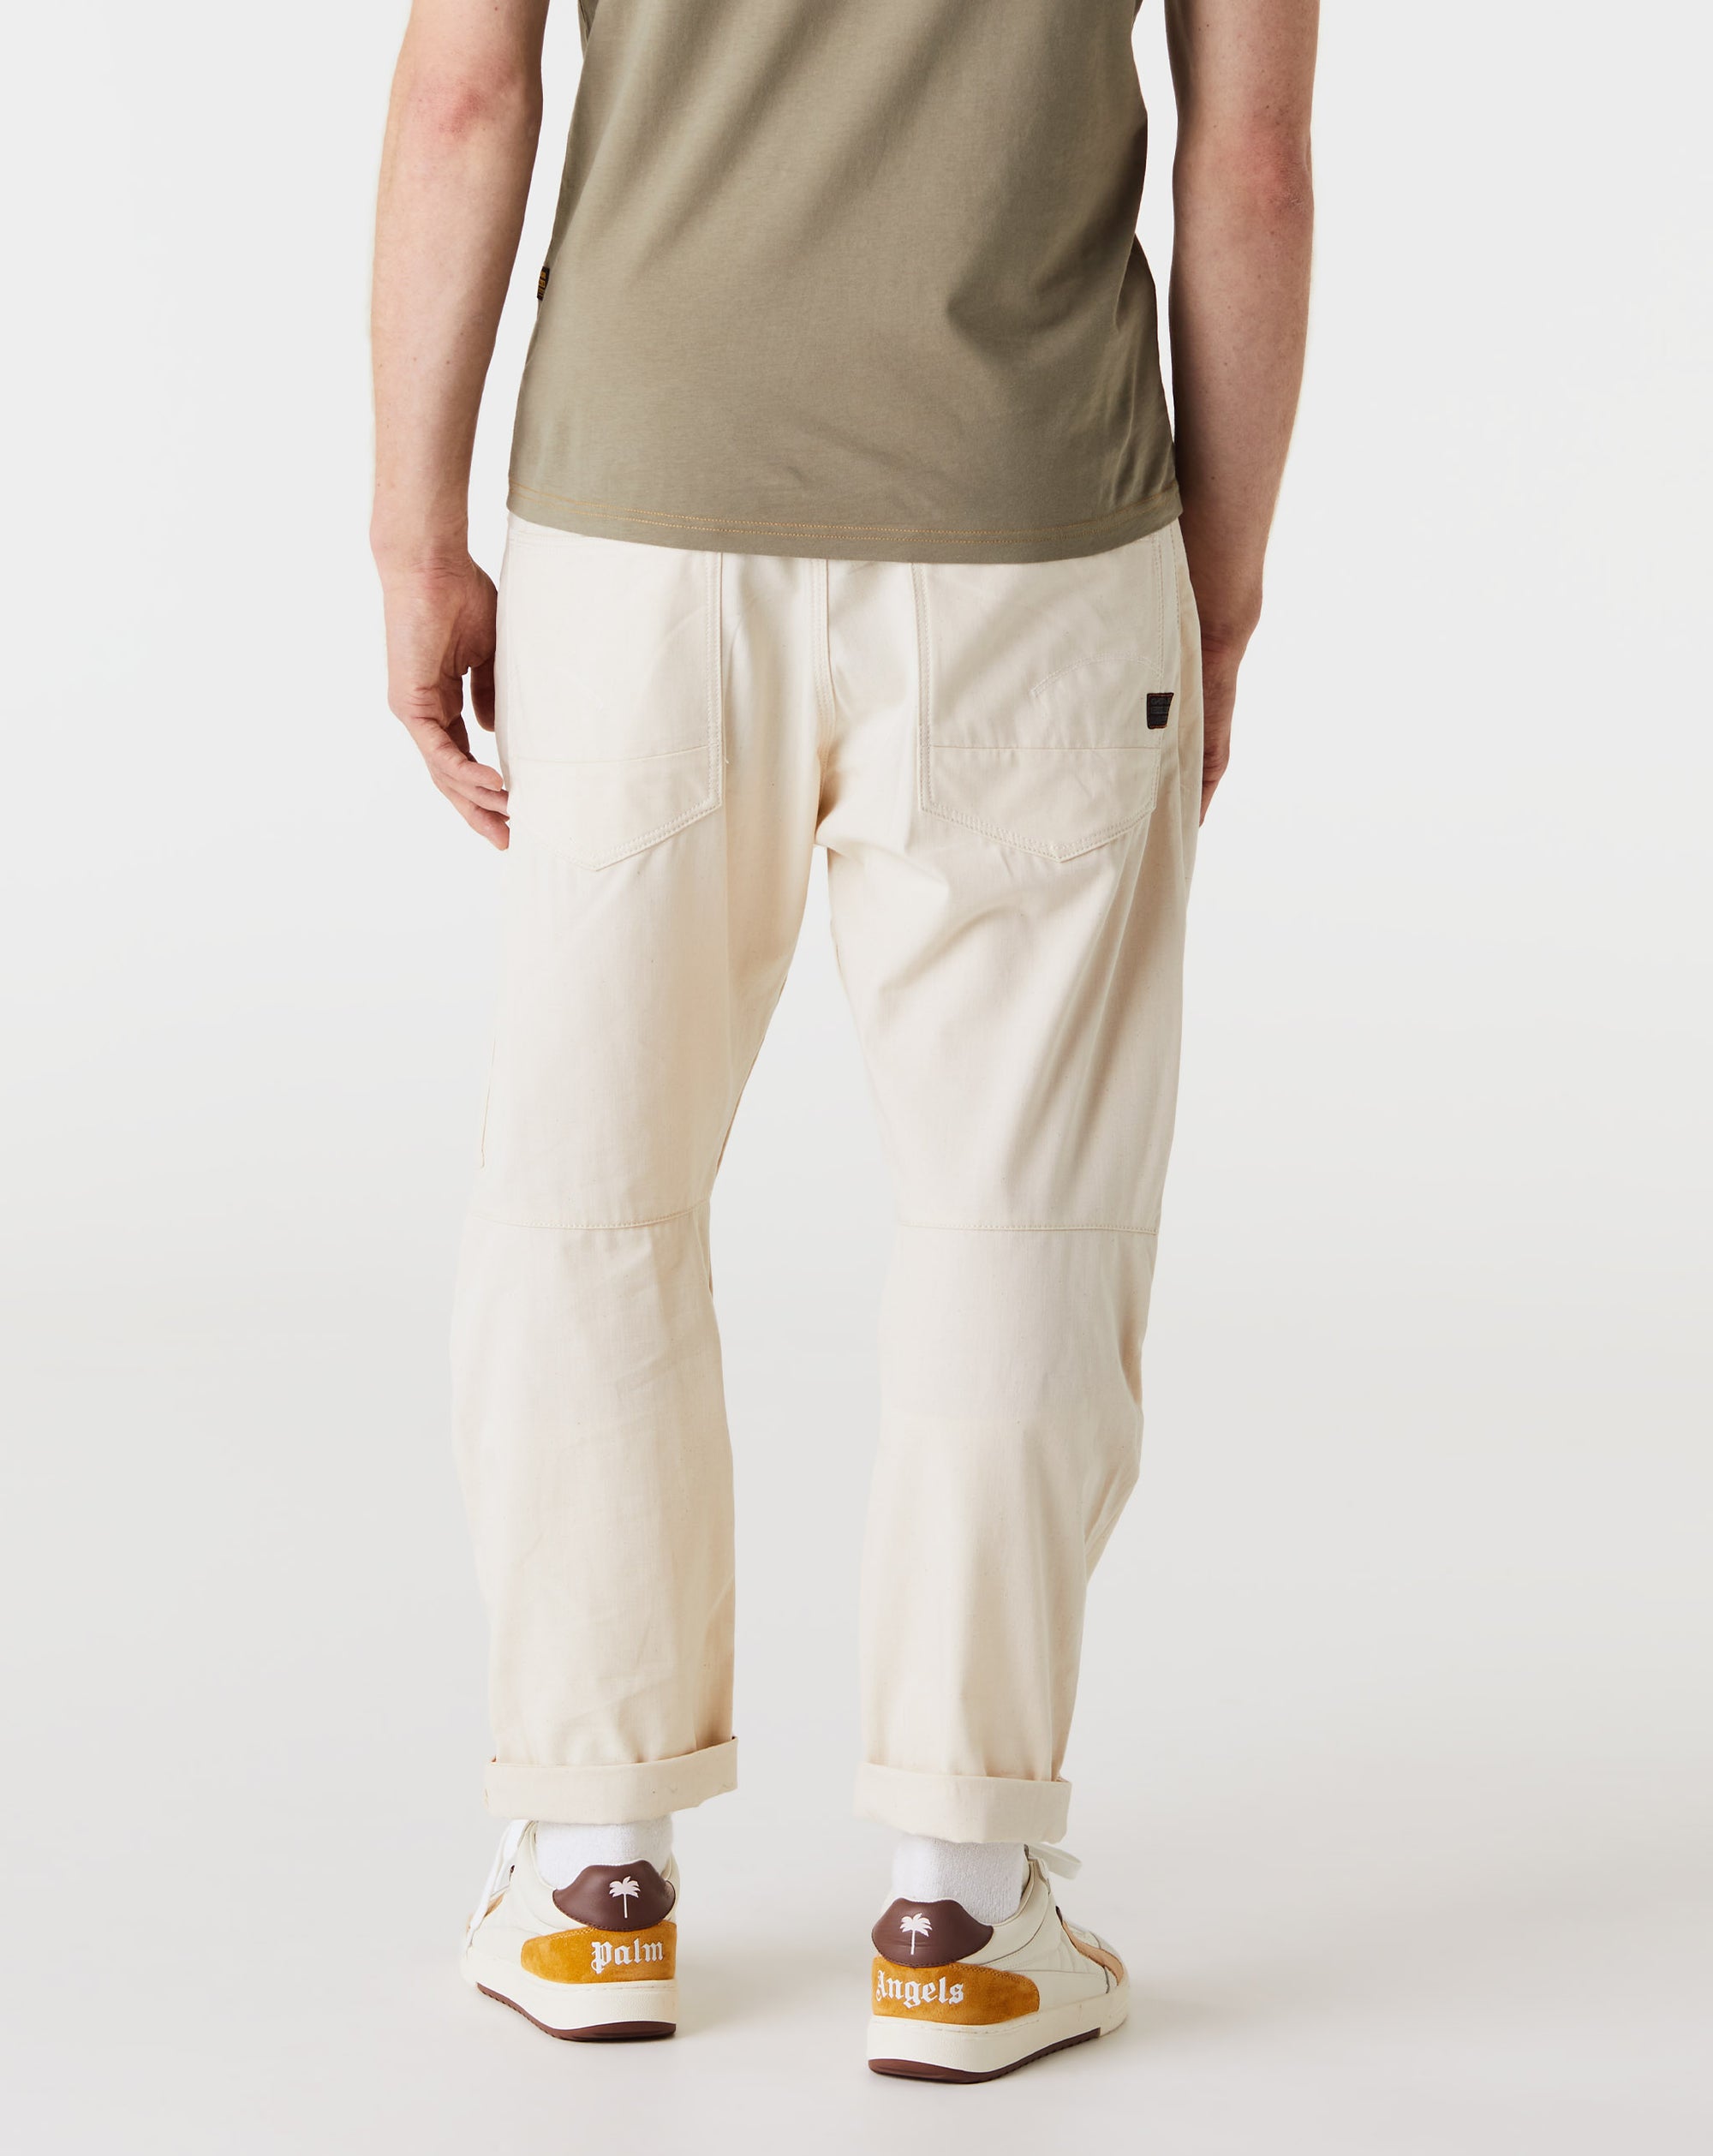 G-Star RAW Bearing 3D Cargo Pants - Rule of Next Apparel